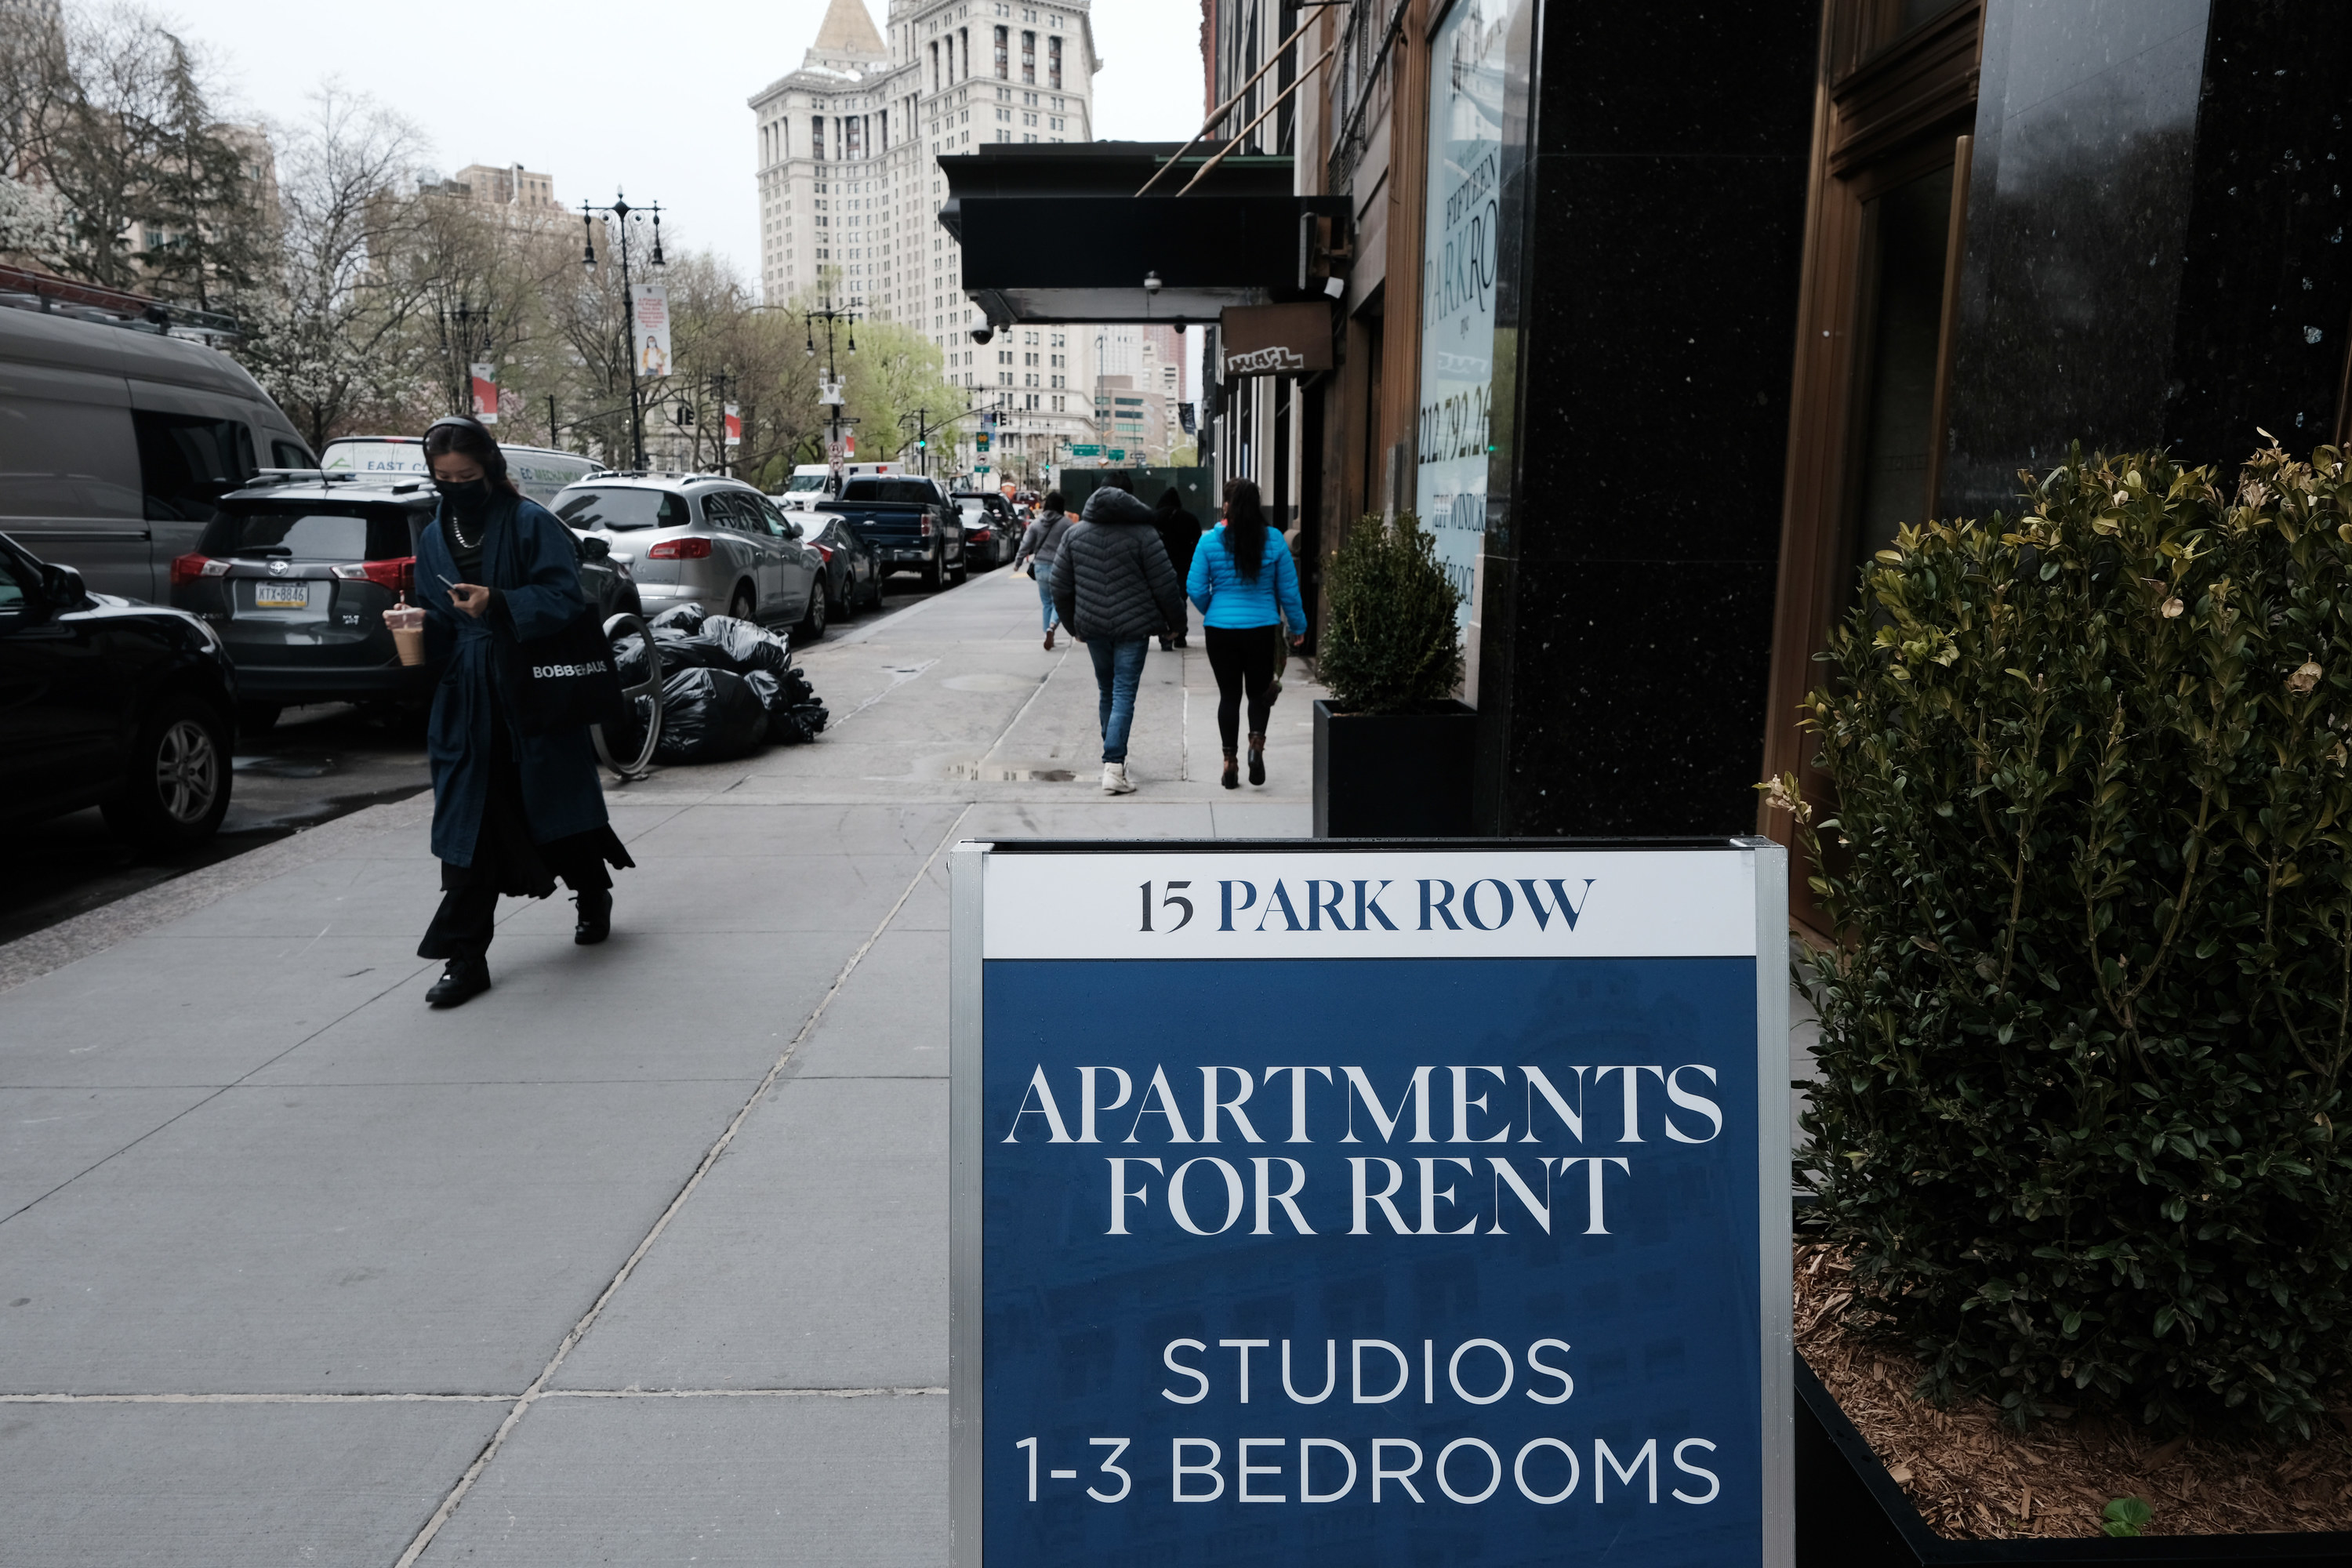 apartments for rent sign in Manhattan